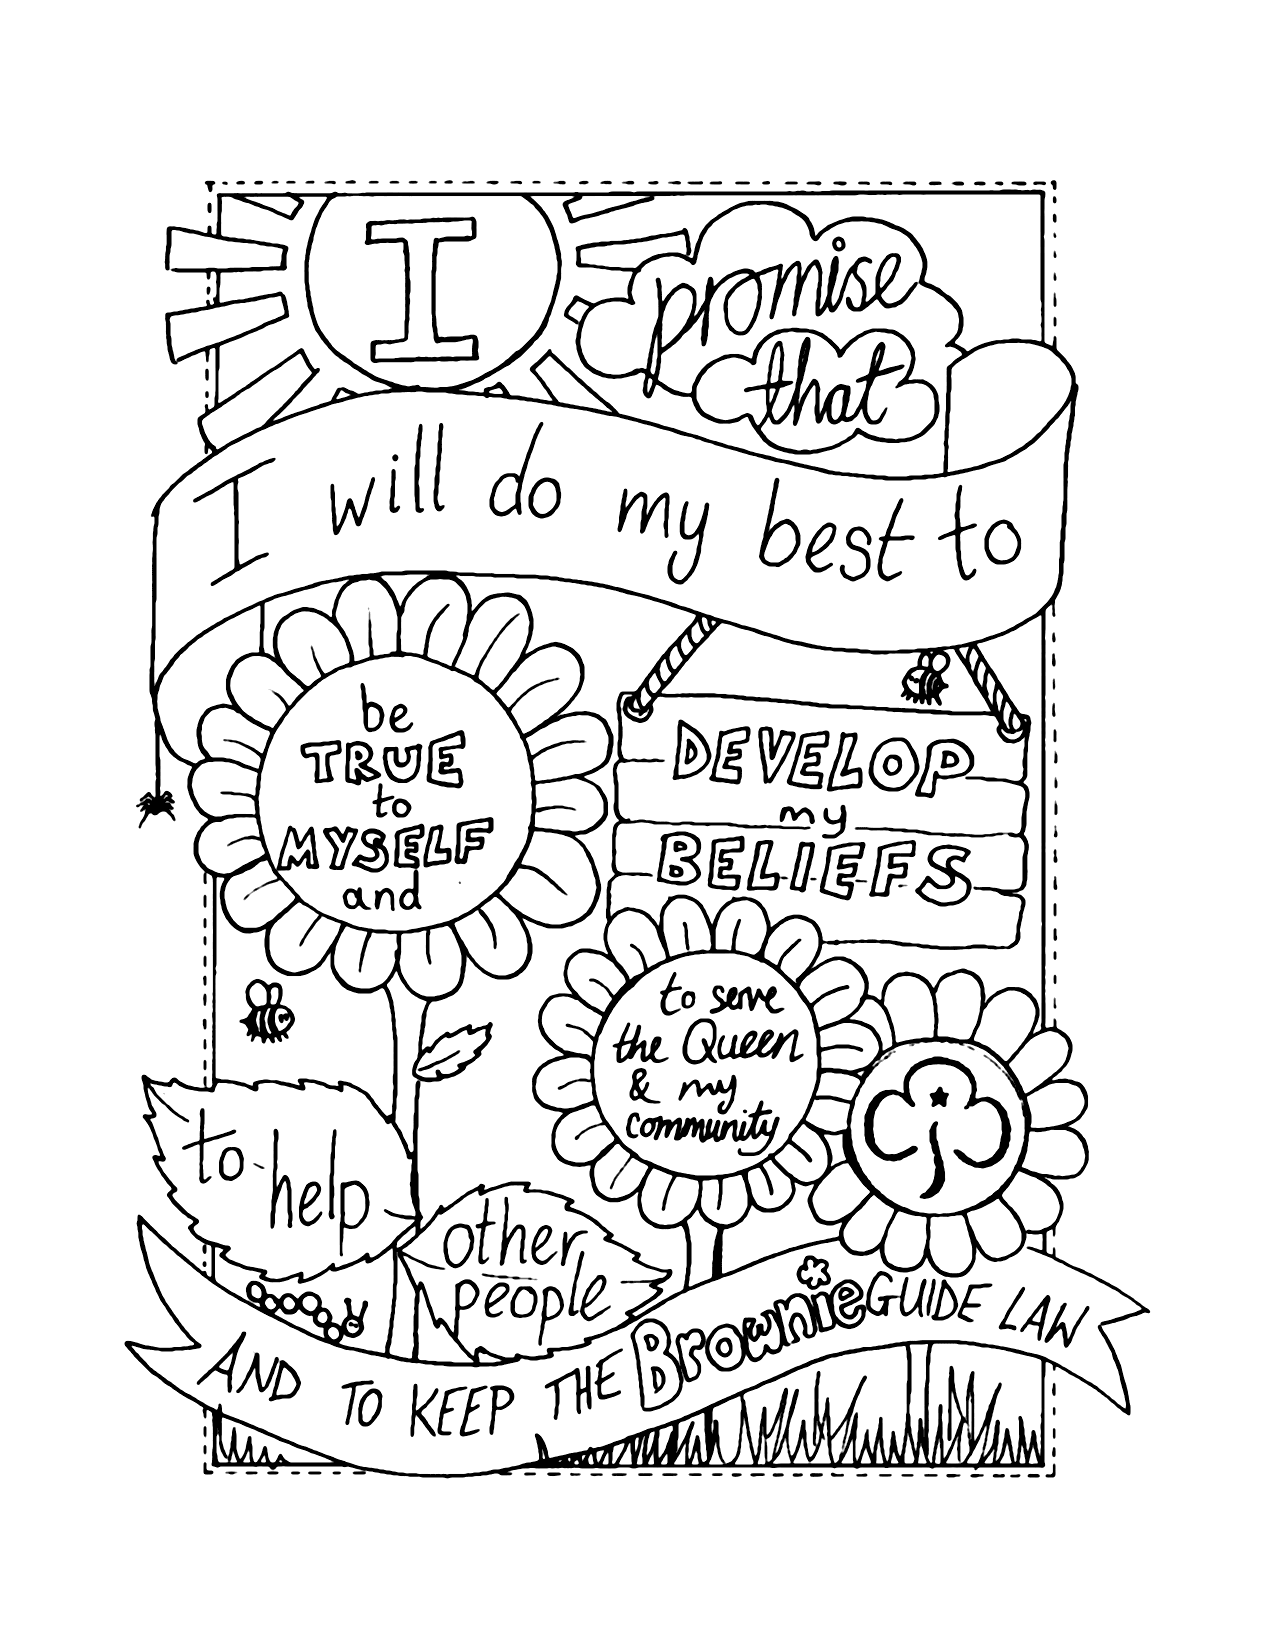 Girl Scout Brownie Promise Coloring Sheet